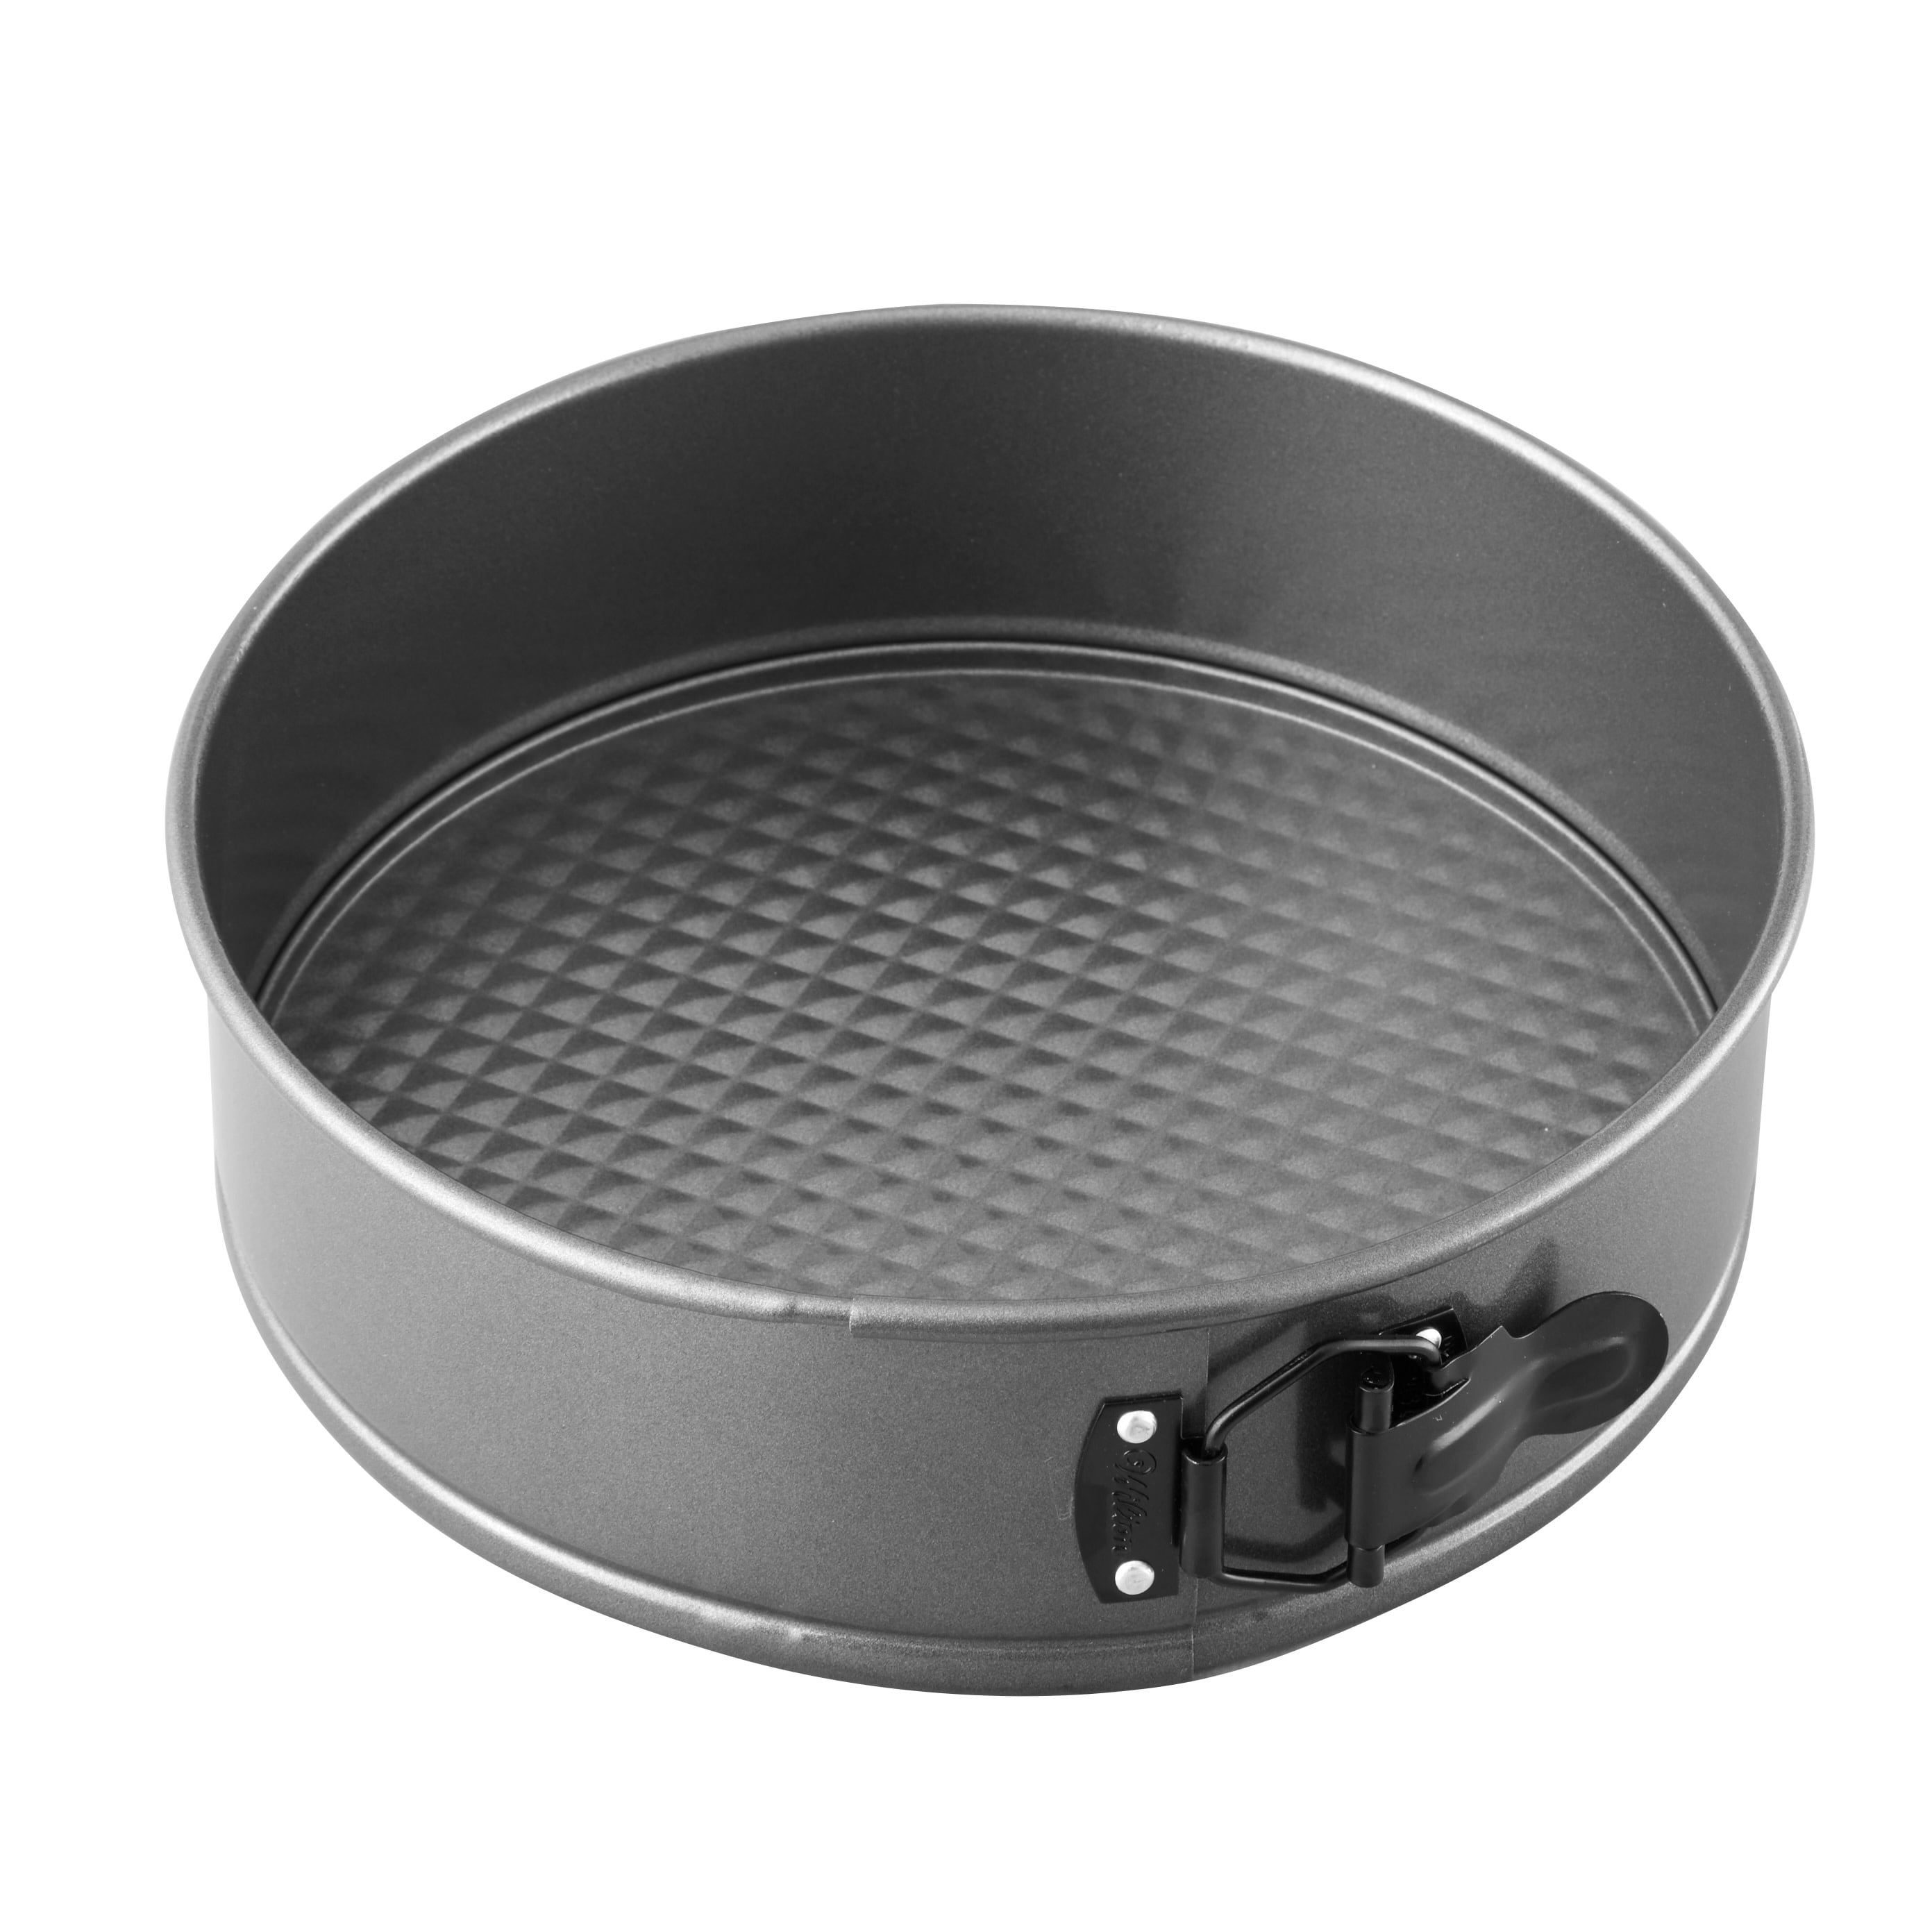 Details about    9 Inch Non Stick Cheesecake Pan Springform Baking Cake Pan Removable Bottom 